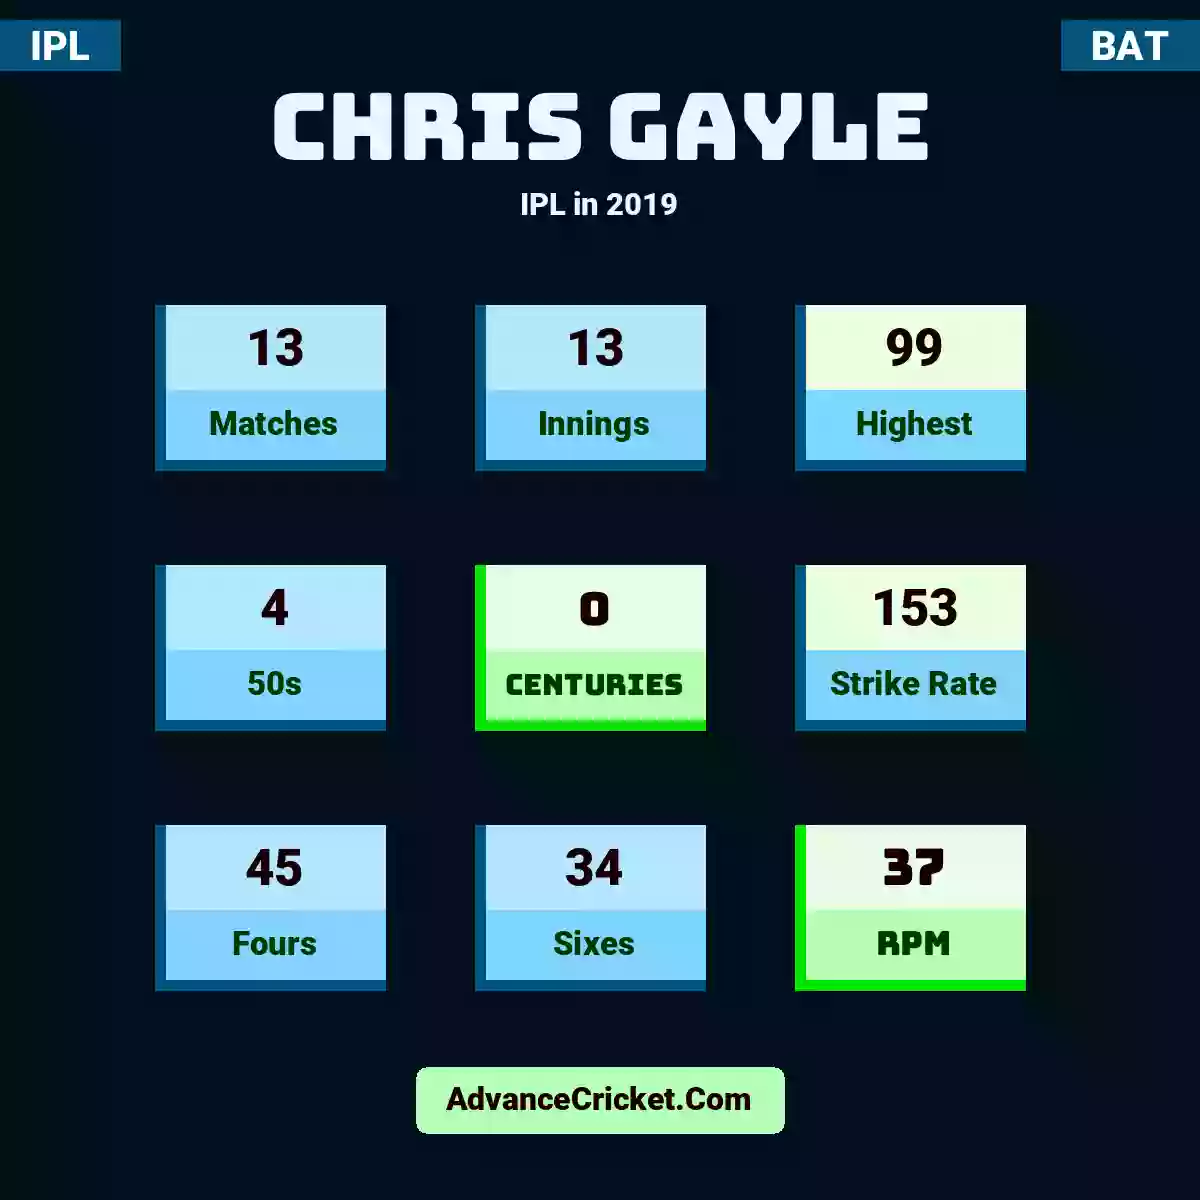 Chris Gayle IPL  in 2019, Chris Gayle played 13 matches, scored 99 runs as highest, 4 half-centuries, and 0 centuries, with a strike rate of 153. C.Gayle hit 45 fours and 34 sixes, with an RPM of 37.